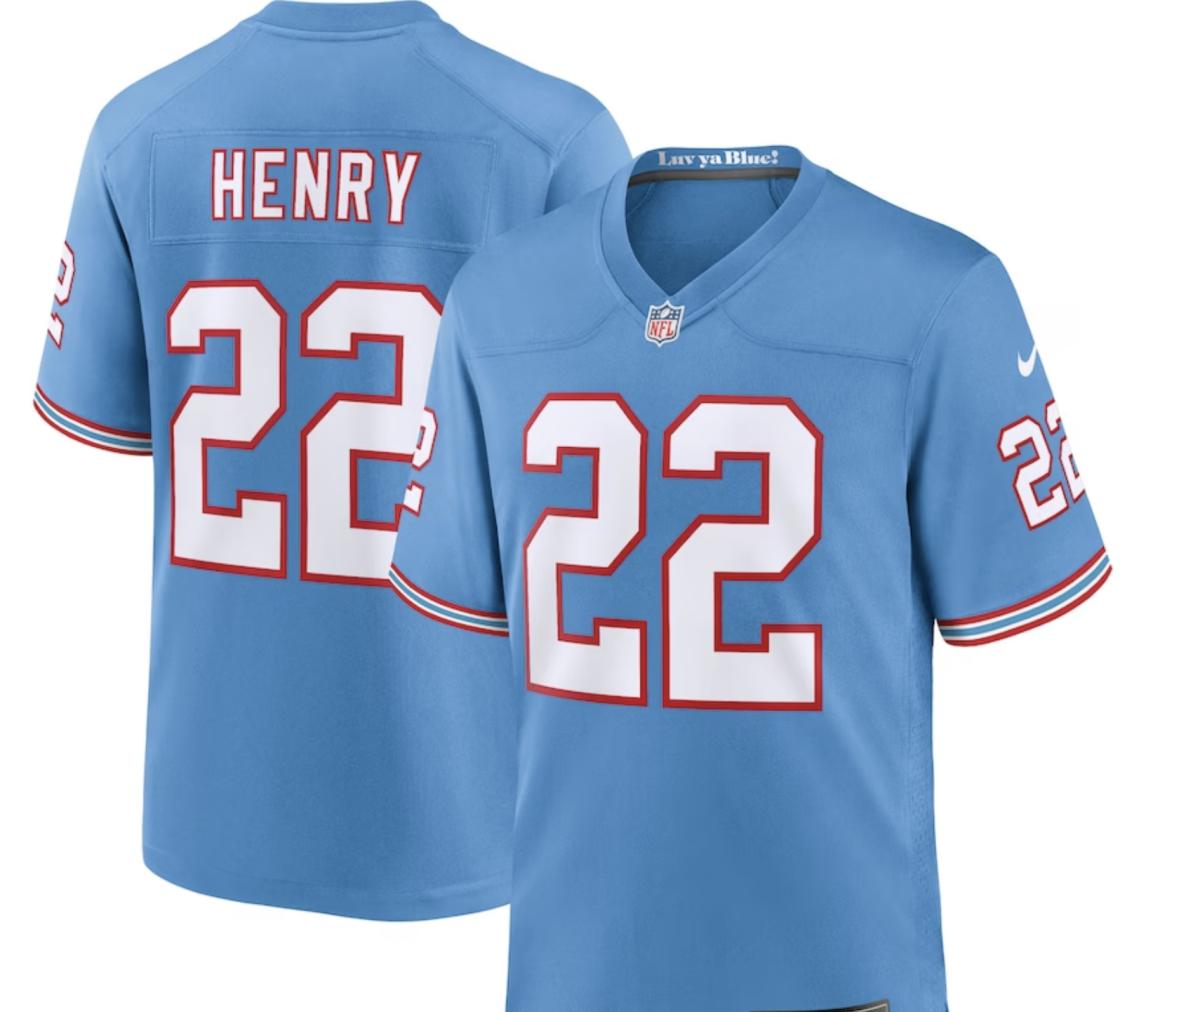 Tennessee Titans Will Wear Oilers Throwbacks Jerseys in These Two